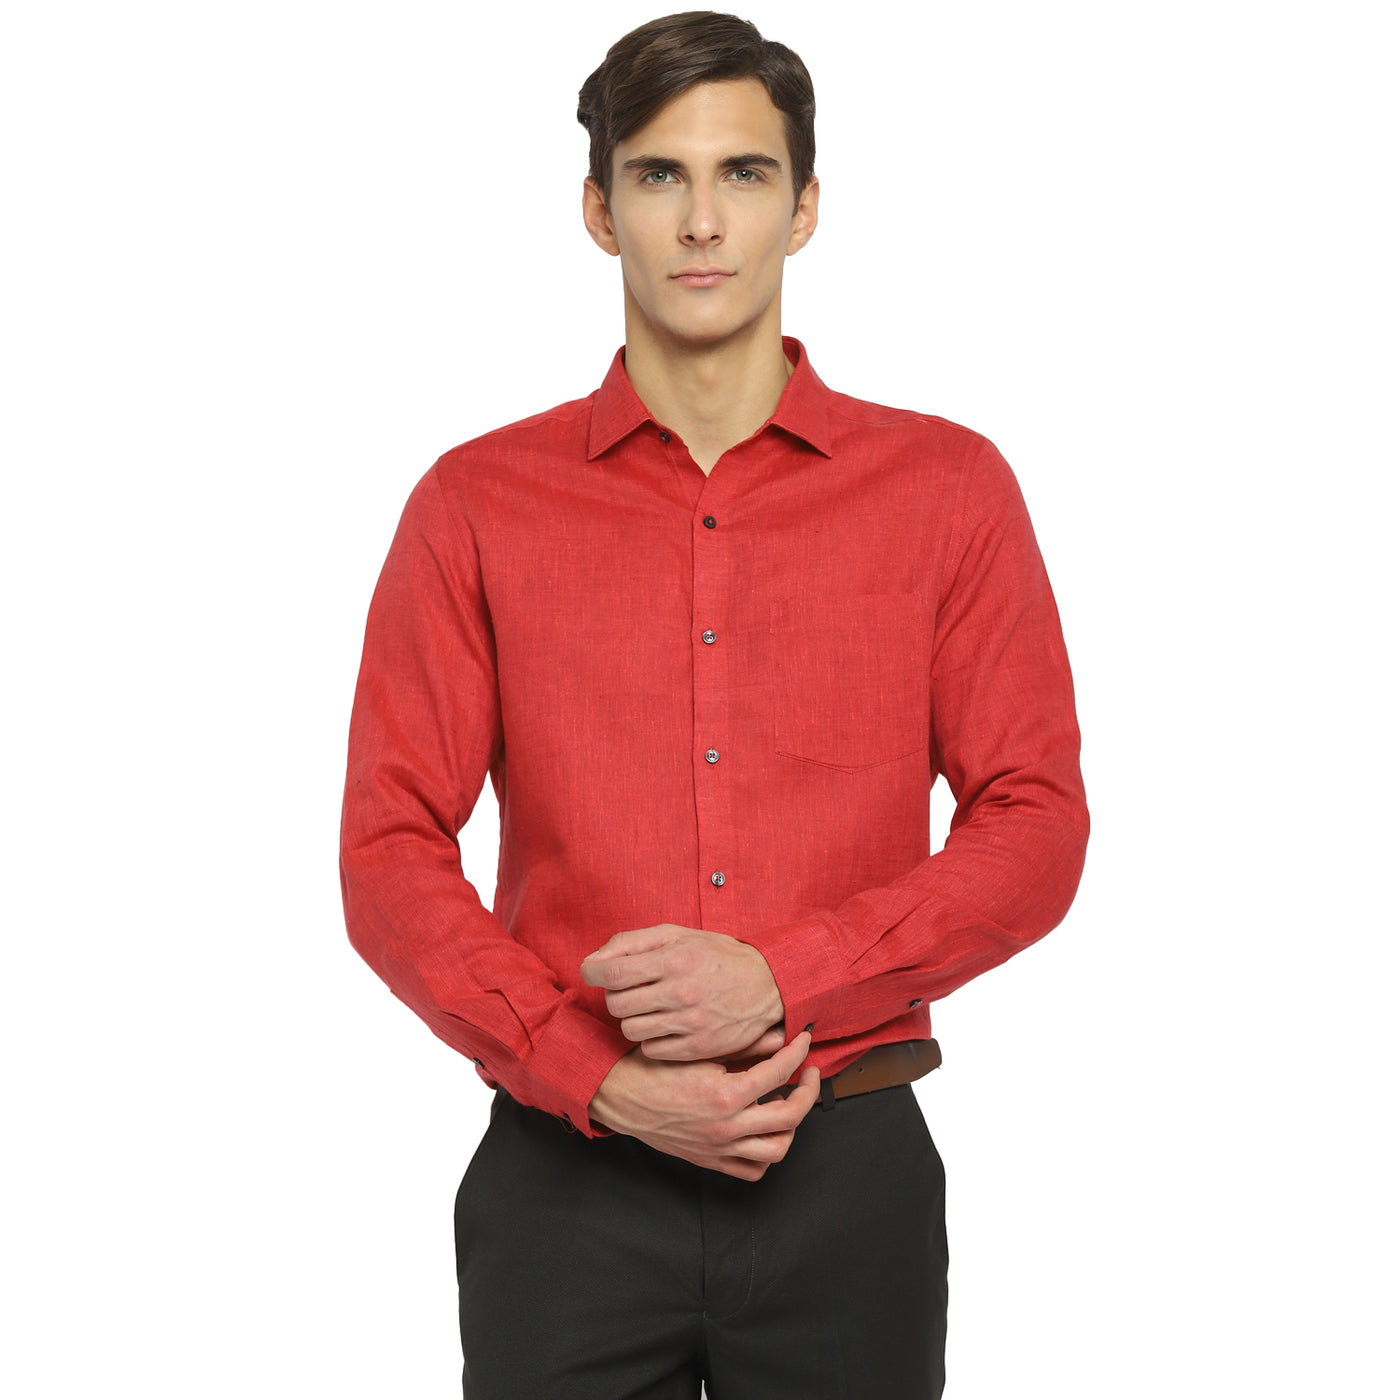 Maroon Linen Solid Slim Fit Shirts